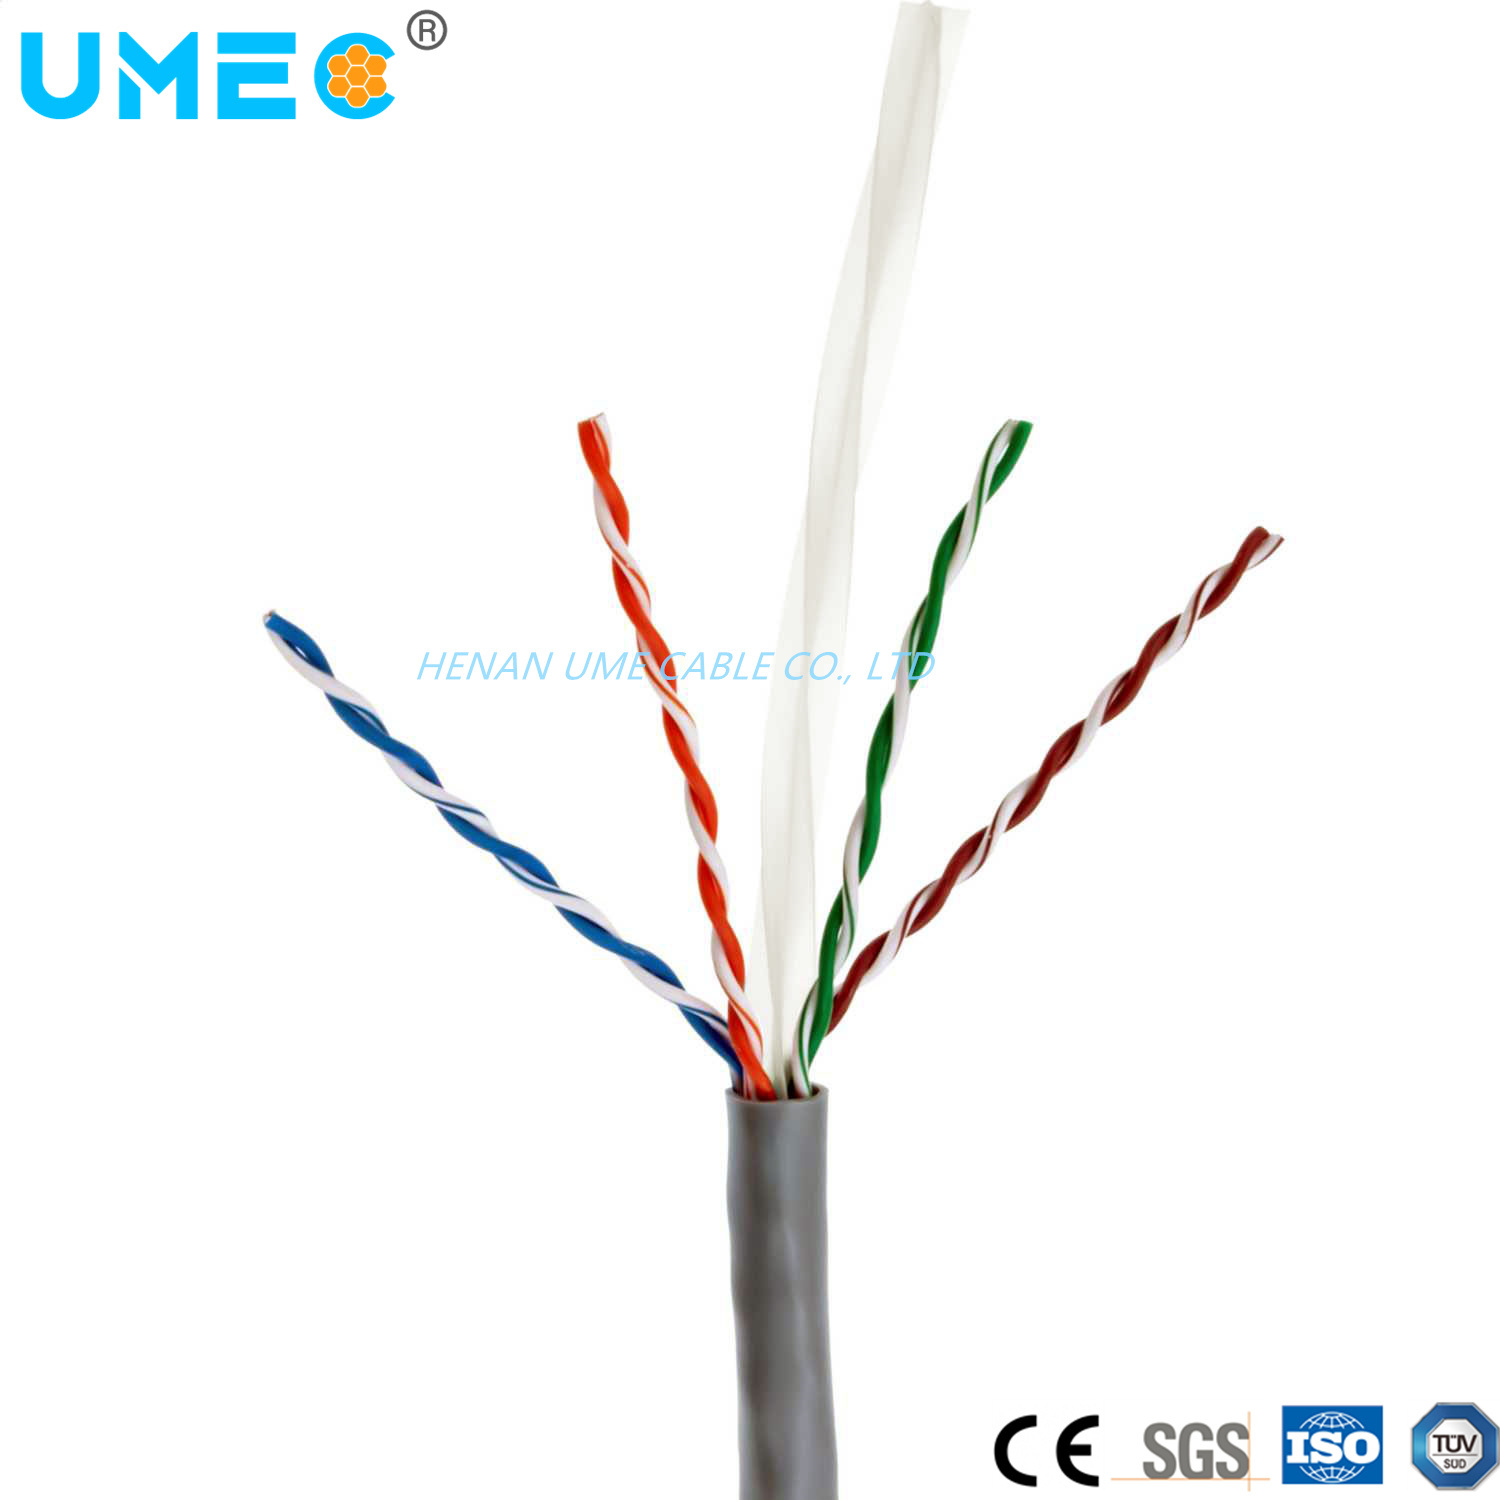 IEC Standard Outdoor Indoor Network CAT6 UTP Cable 305 Meter Per Roll Internet Cable UTP CAT6 LAN Cable 23AWG 24AWG